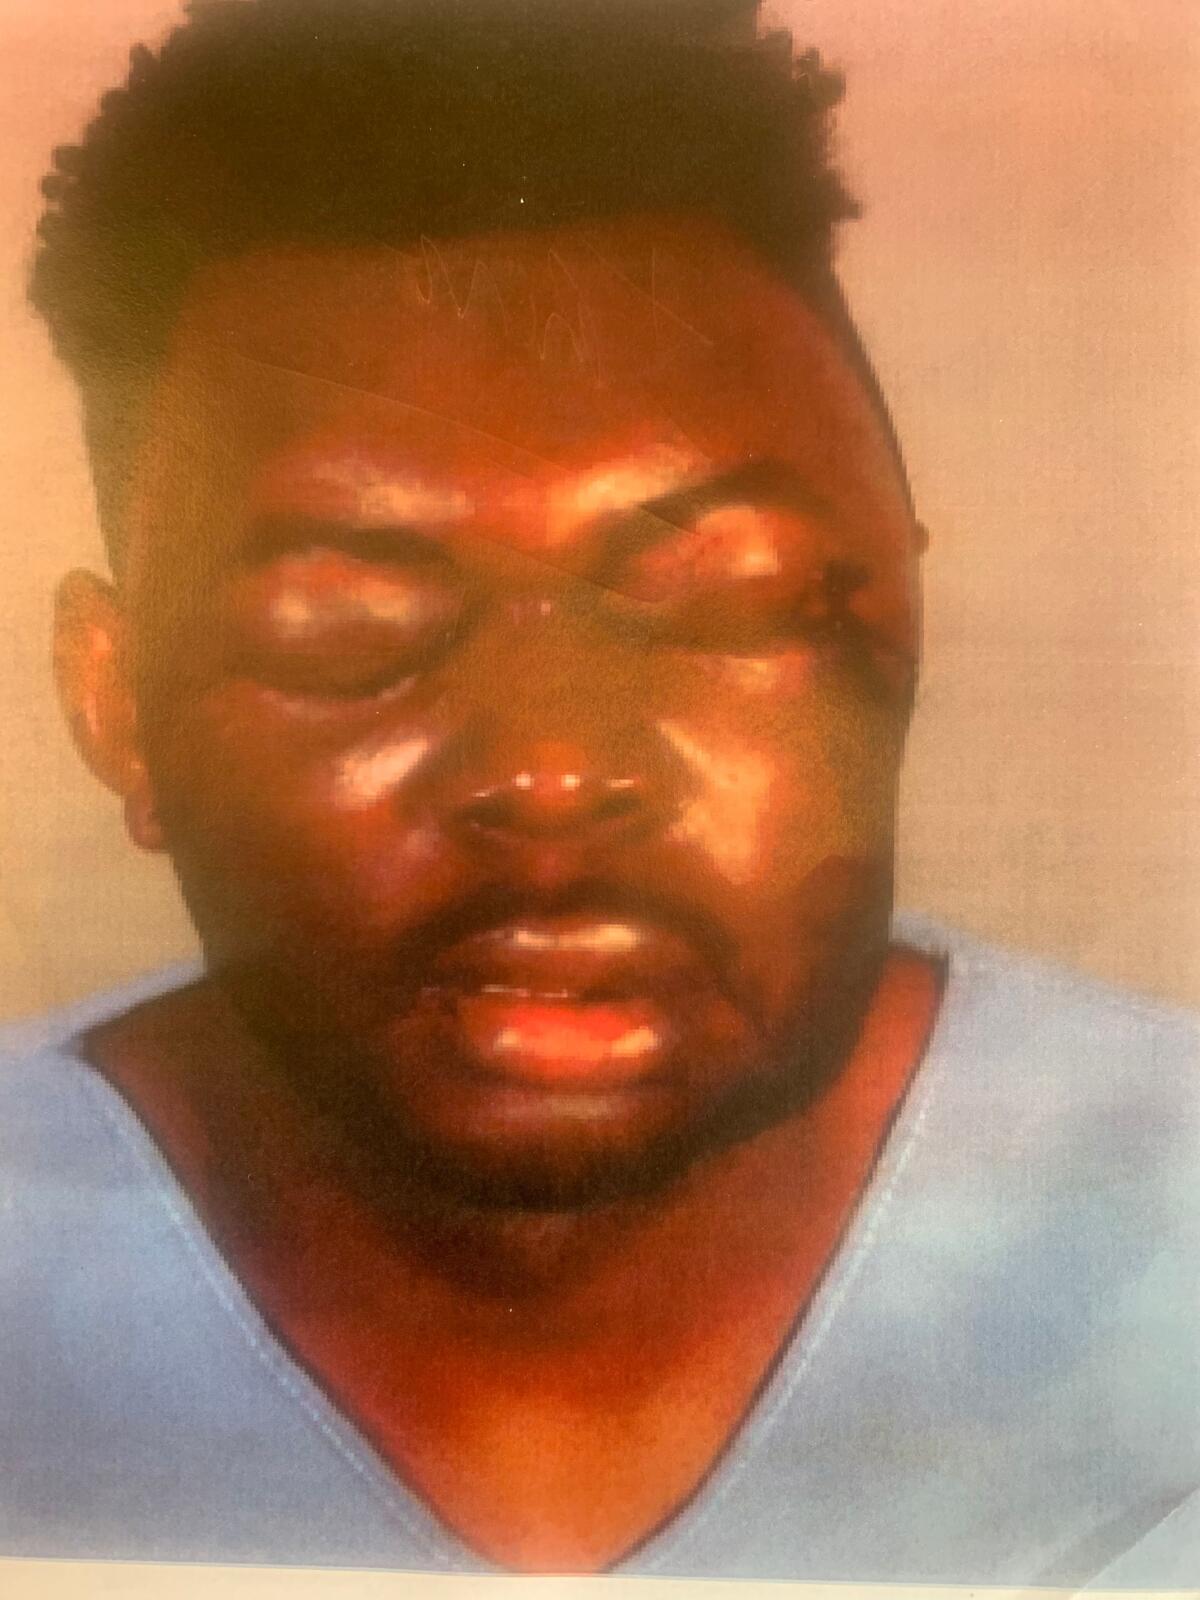 A man with closed, swollen eyes and bruises on his face